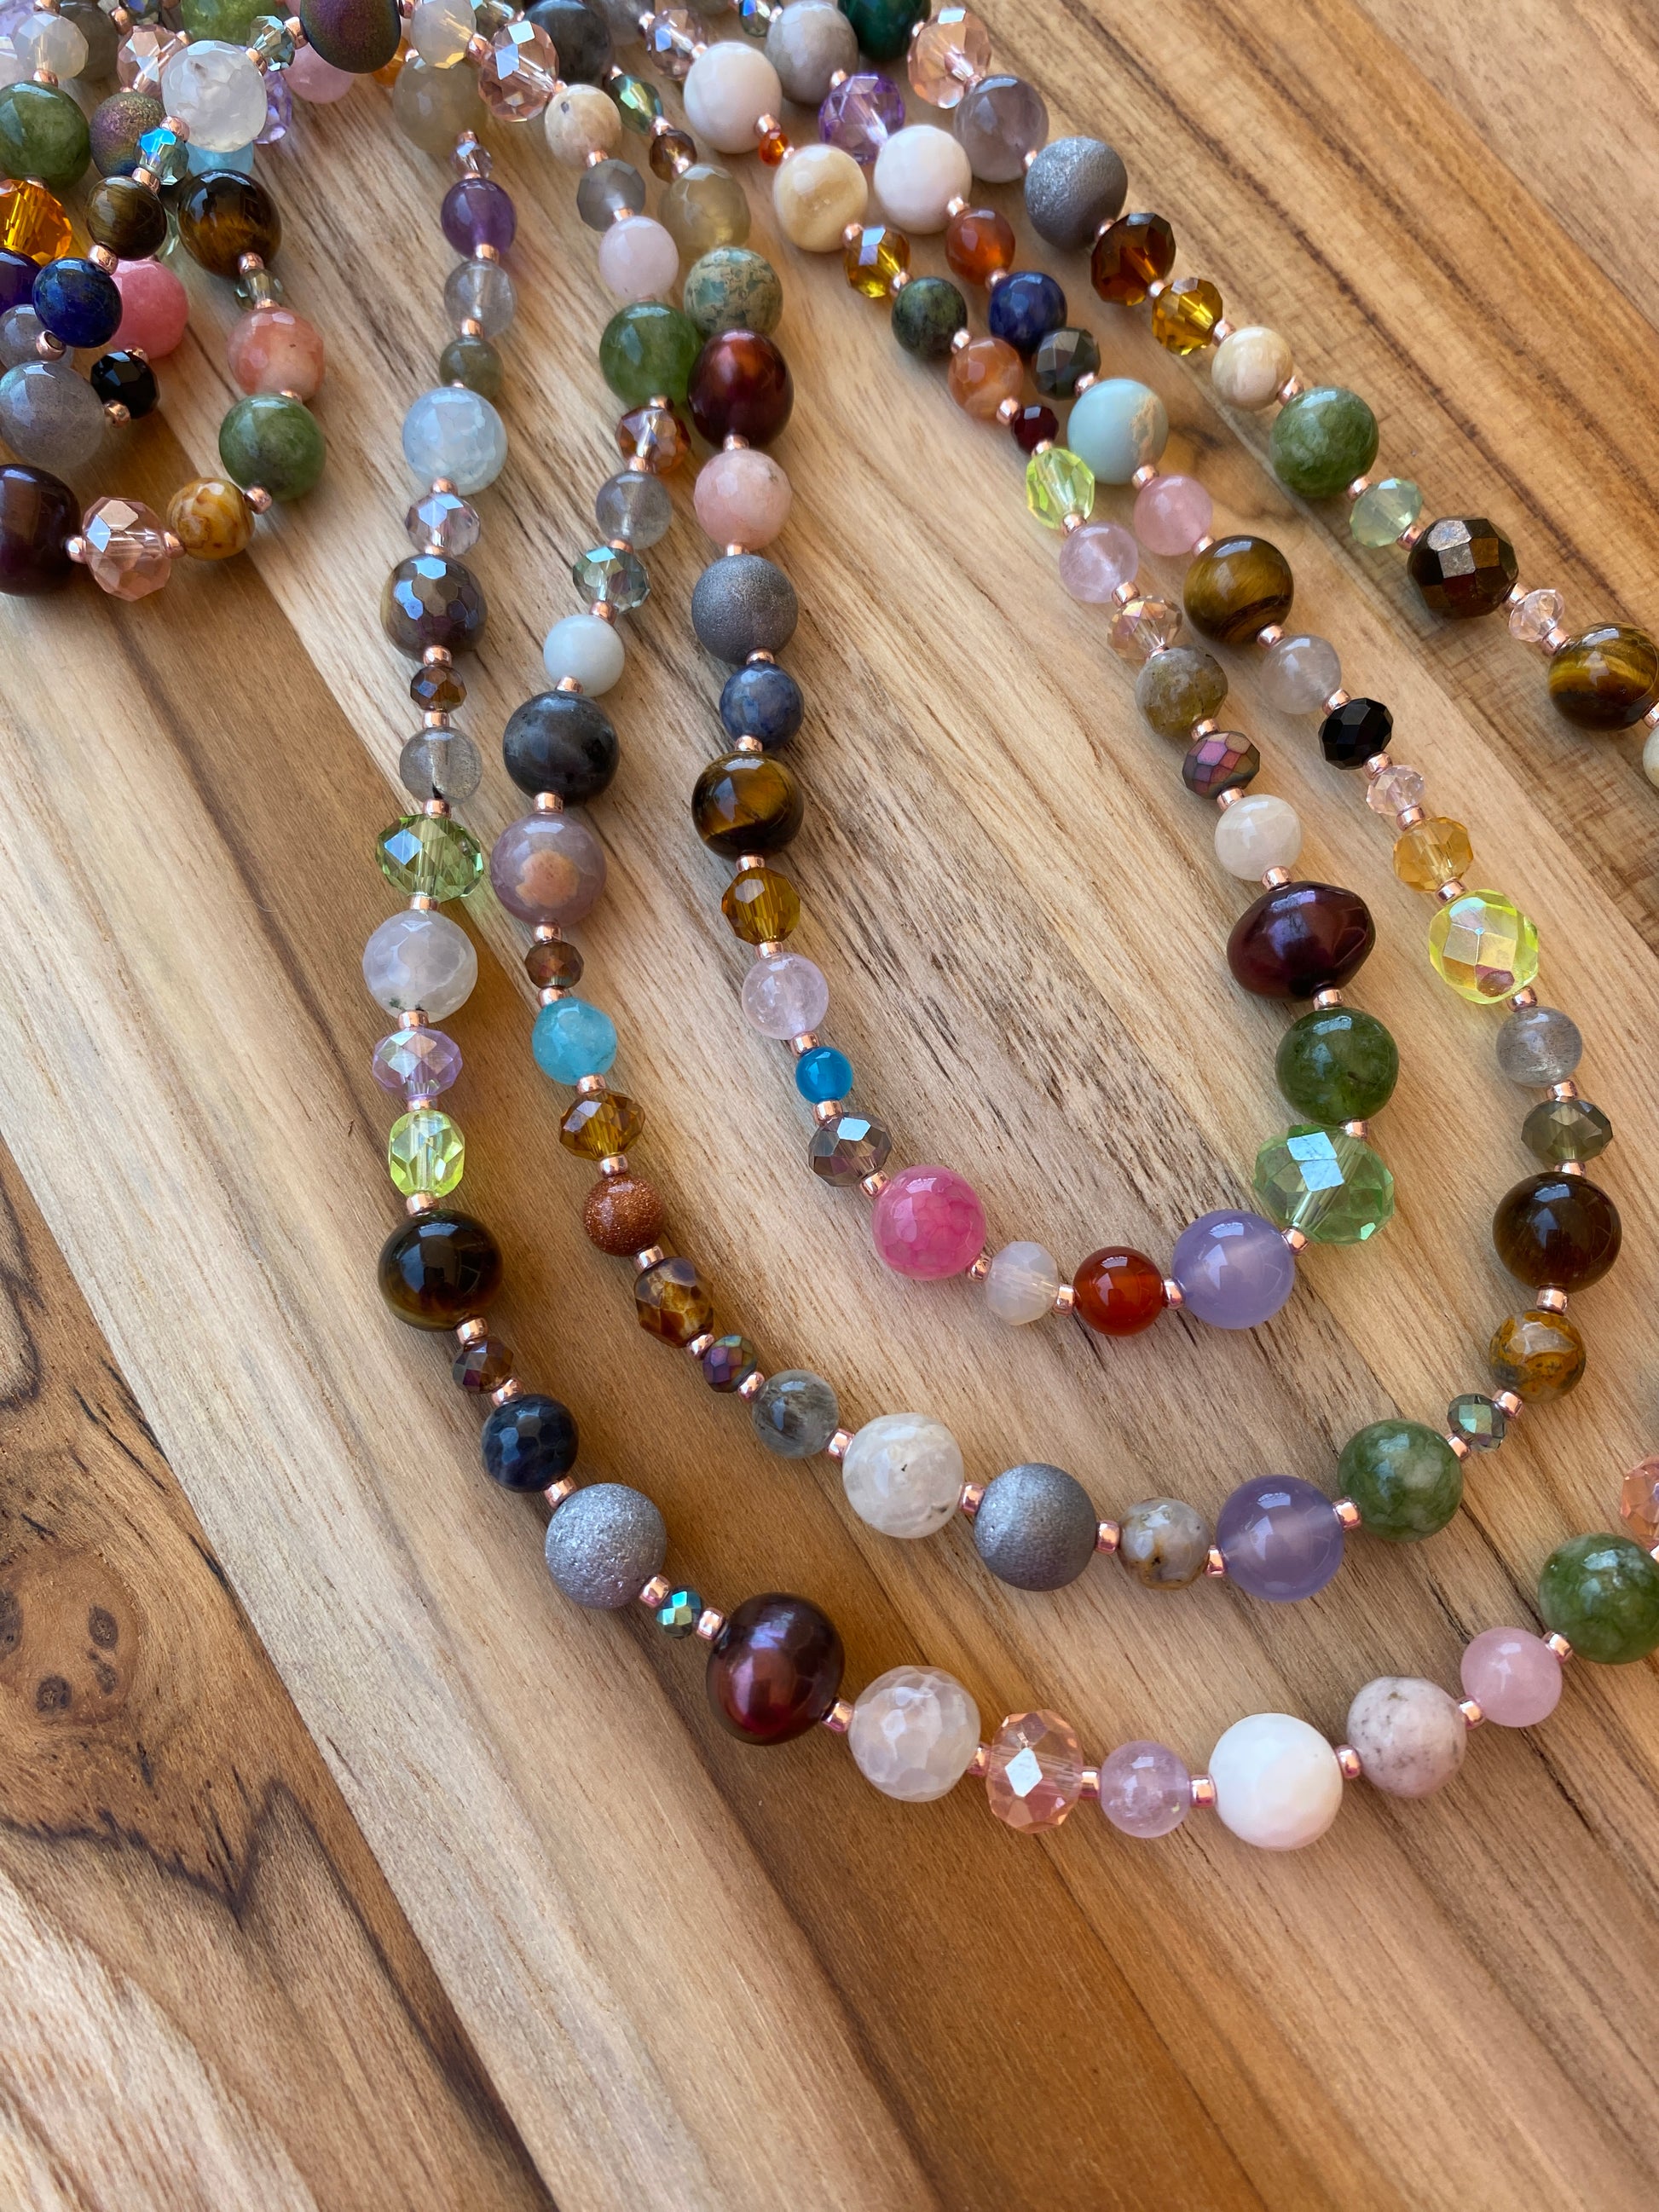 60" Extra Long Wraparound Style Multi Gemstone Beaded Necklace with Crystal and Glass Beads - My Urban Gems